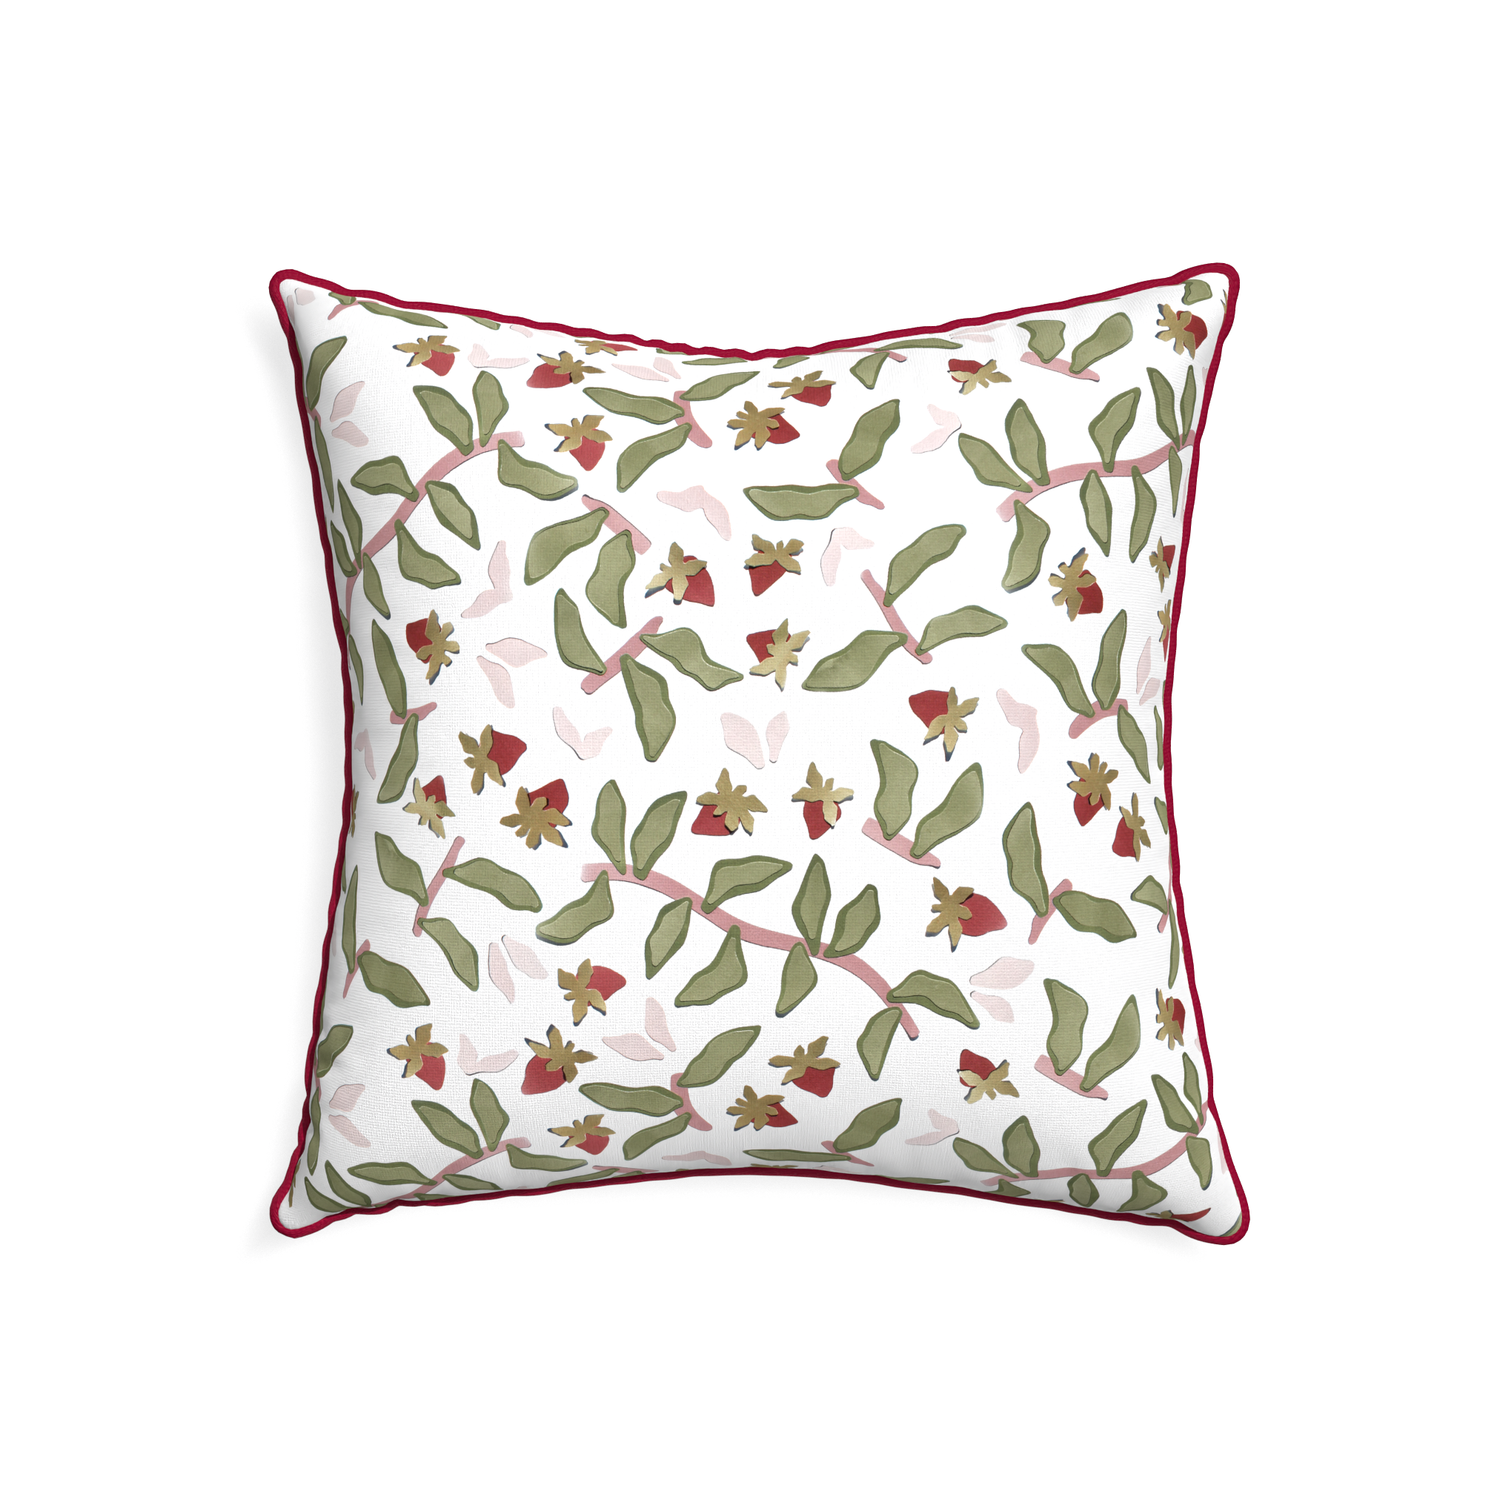 22-square nellie custom strawberry & botanicalpillow with raspberry piping on white background